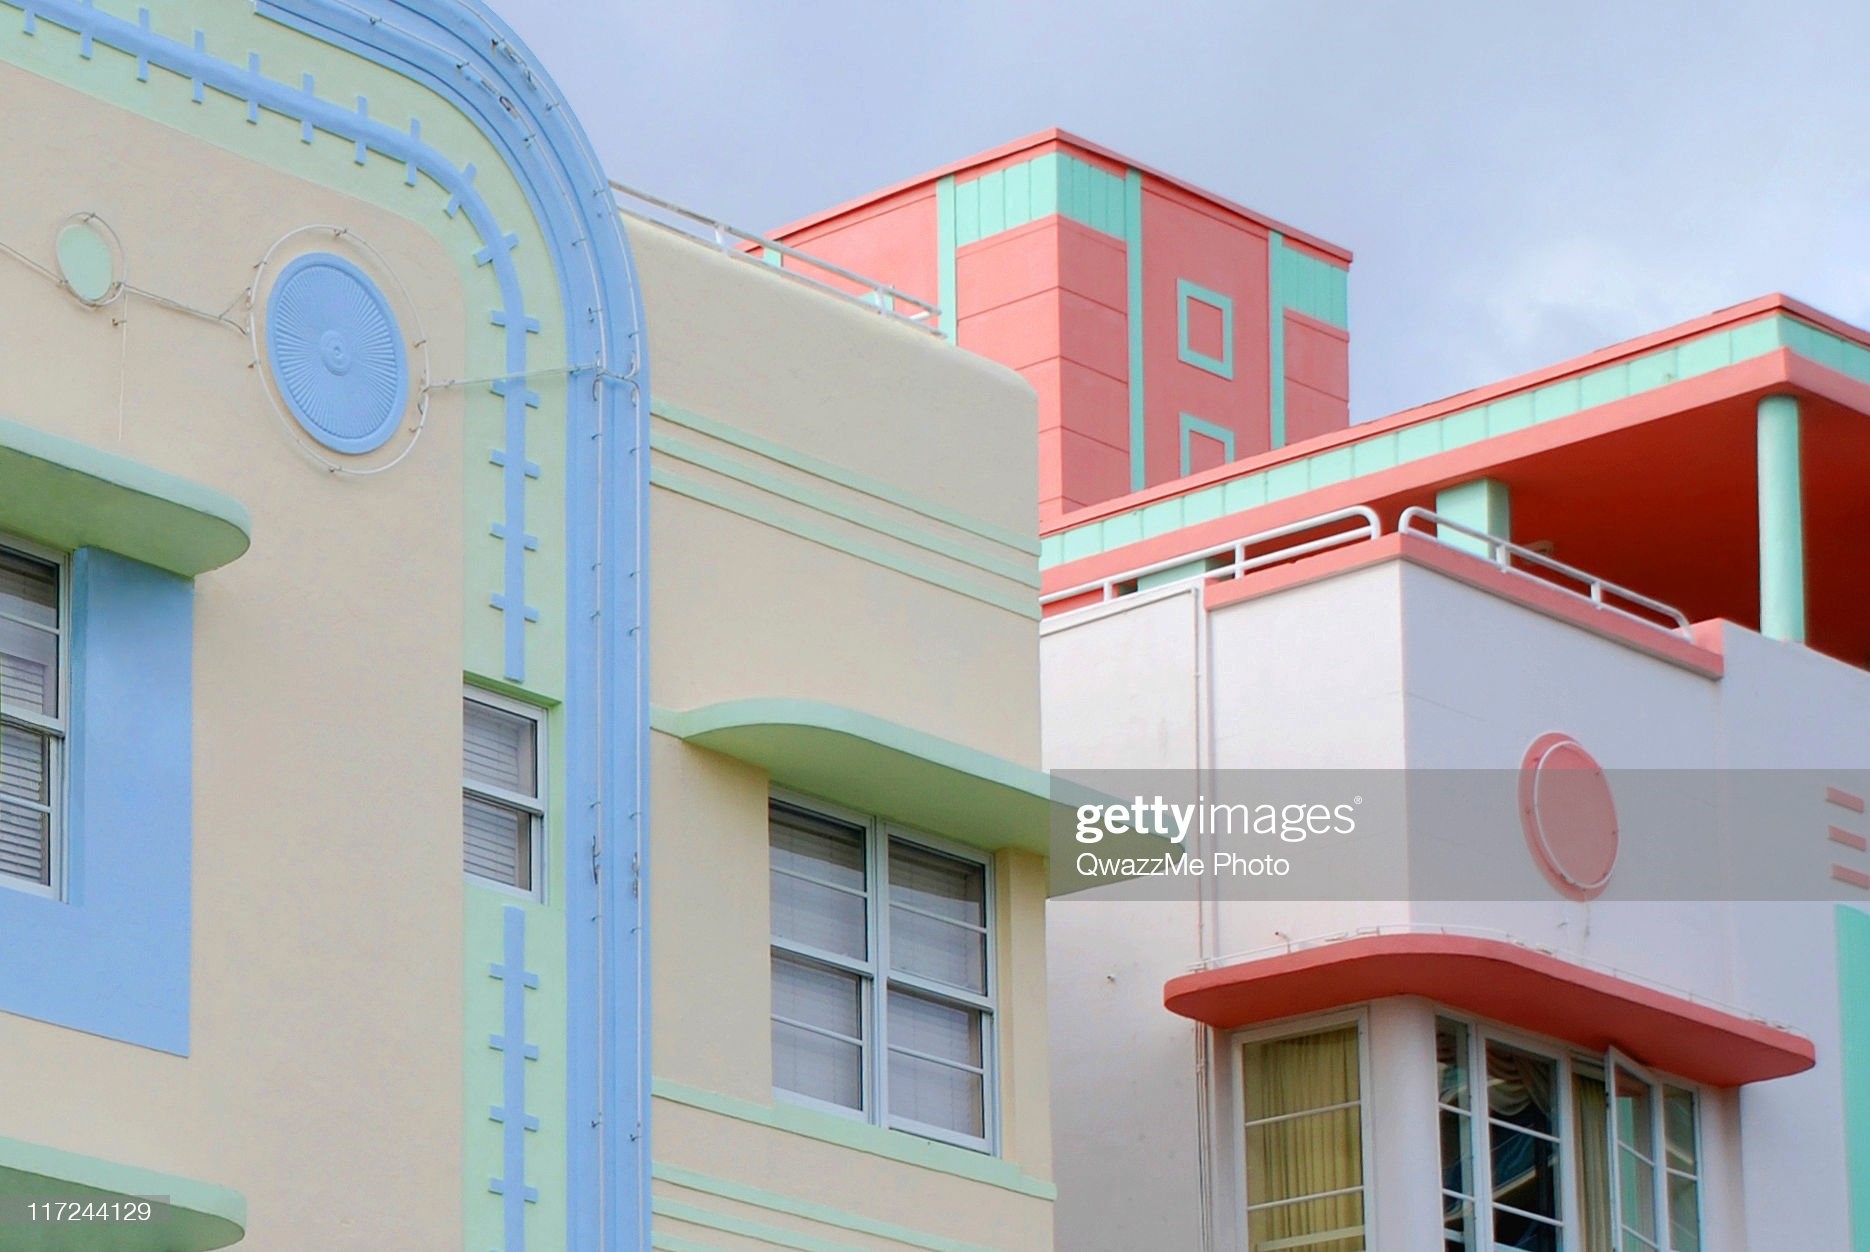 Two Art Deco style houses on Ocean Drive, South Beach, Miami.